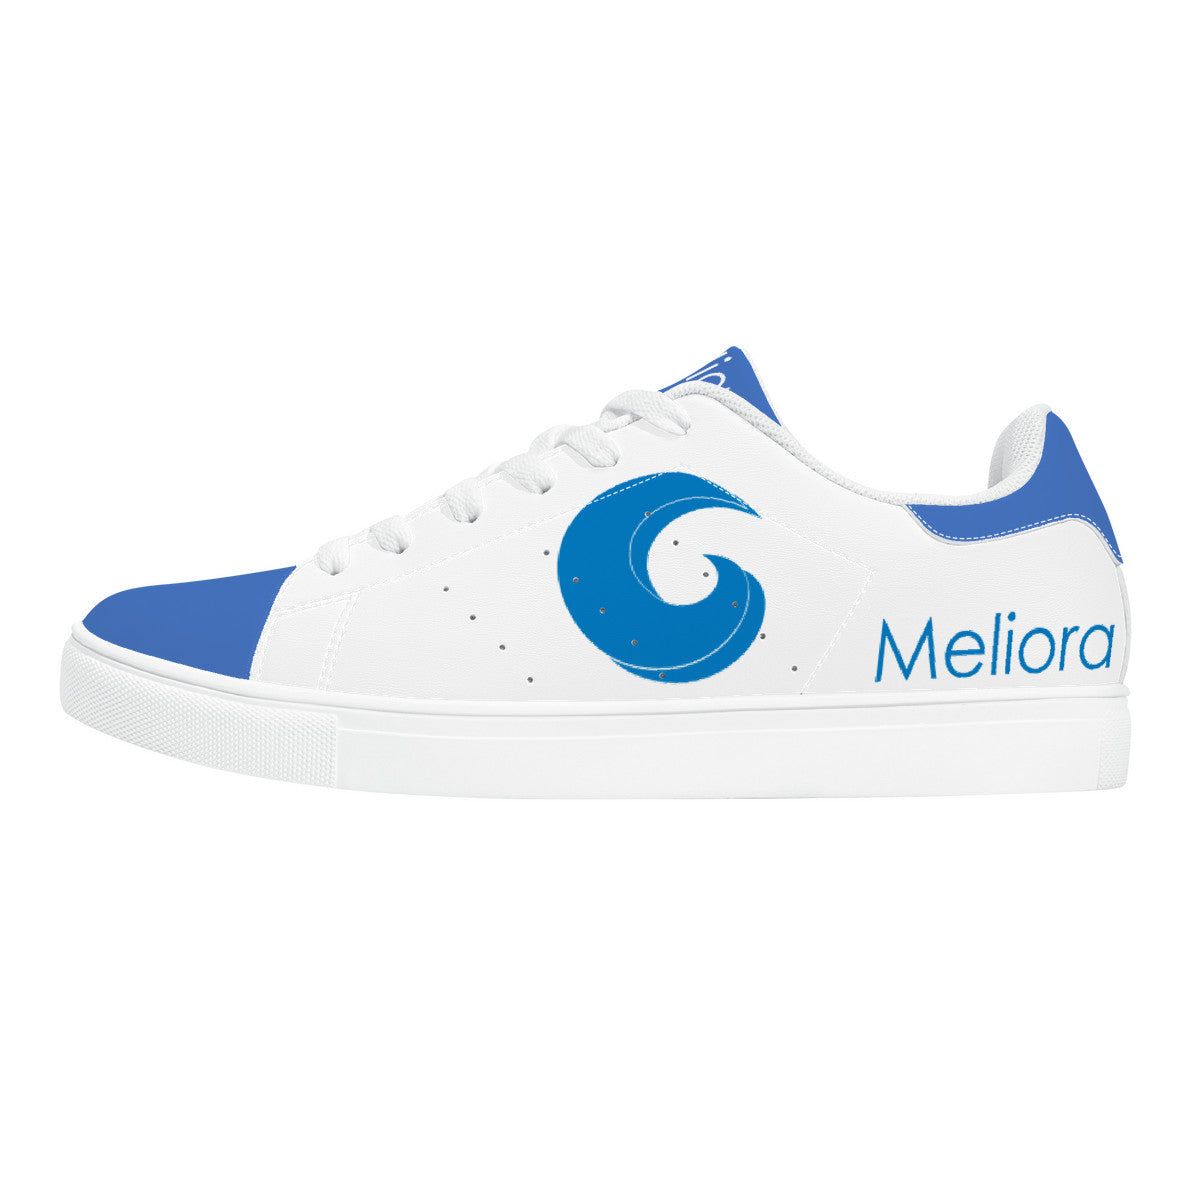 Meliora Medtech Designed Shoes V2 | White and Blue Low-Top Sneakers - White - Shoe Zero